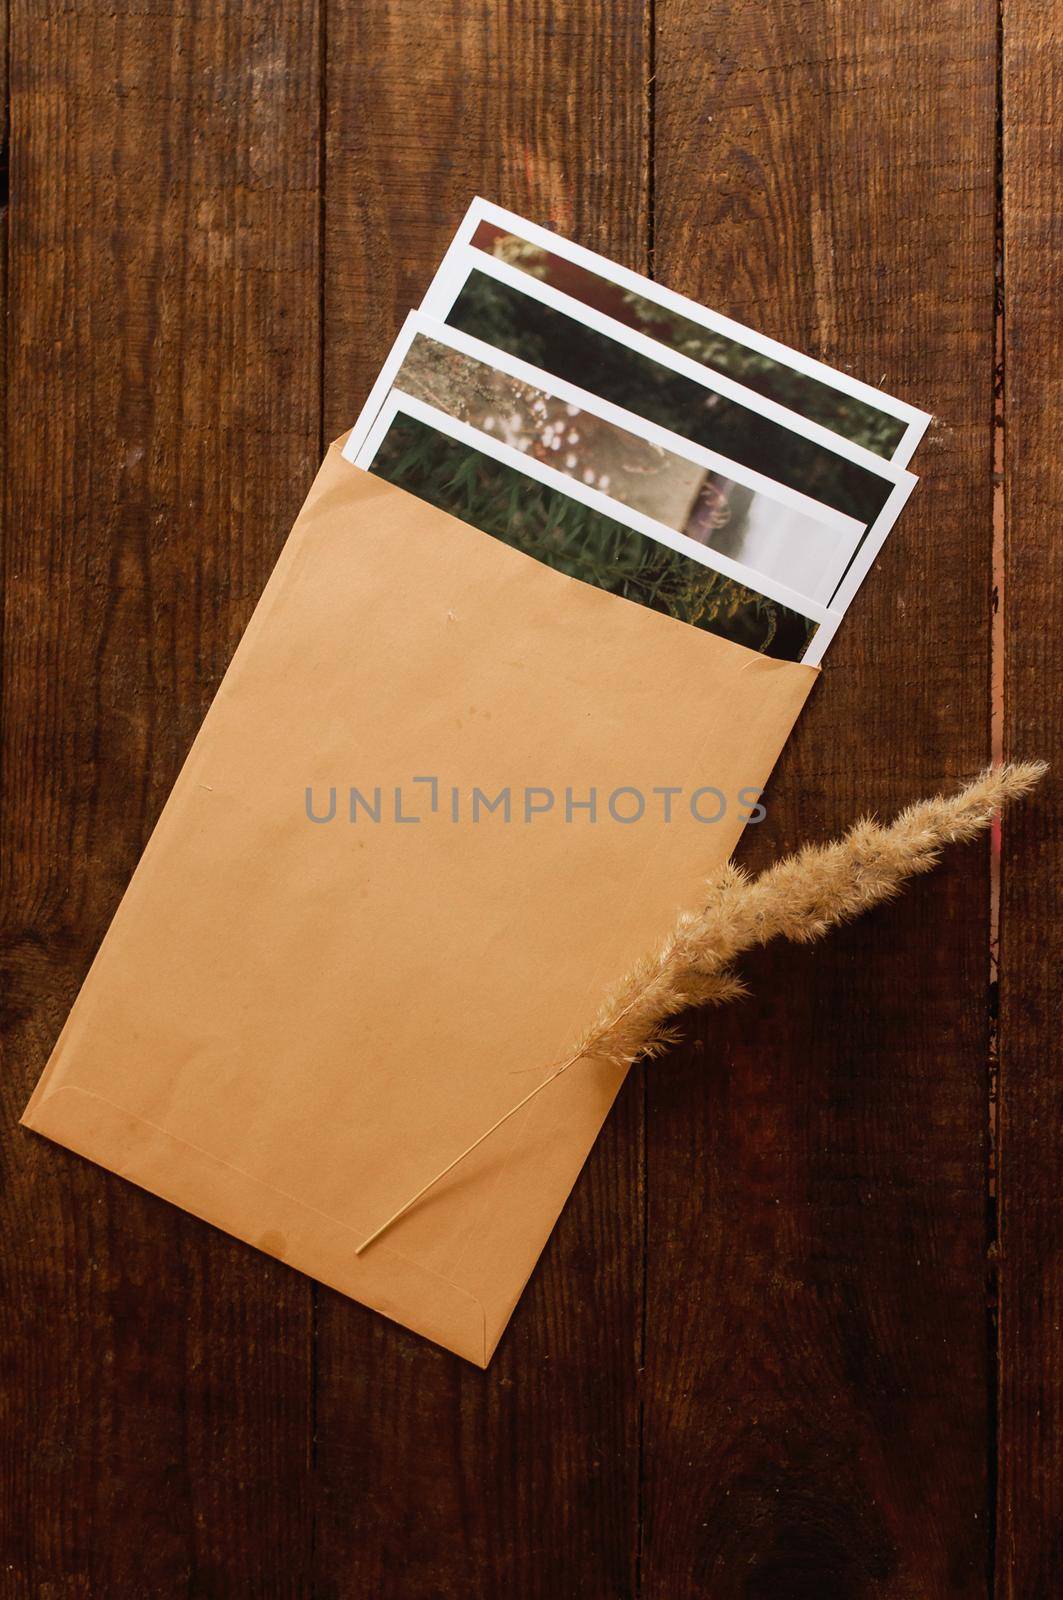 photos are enclosed in a beige envelope by ozornina